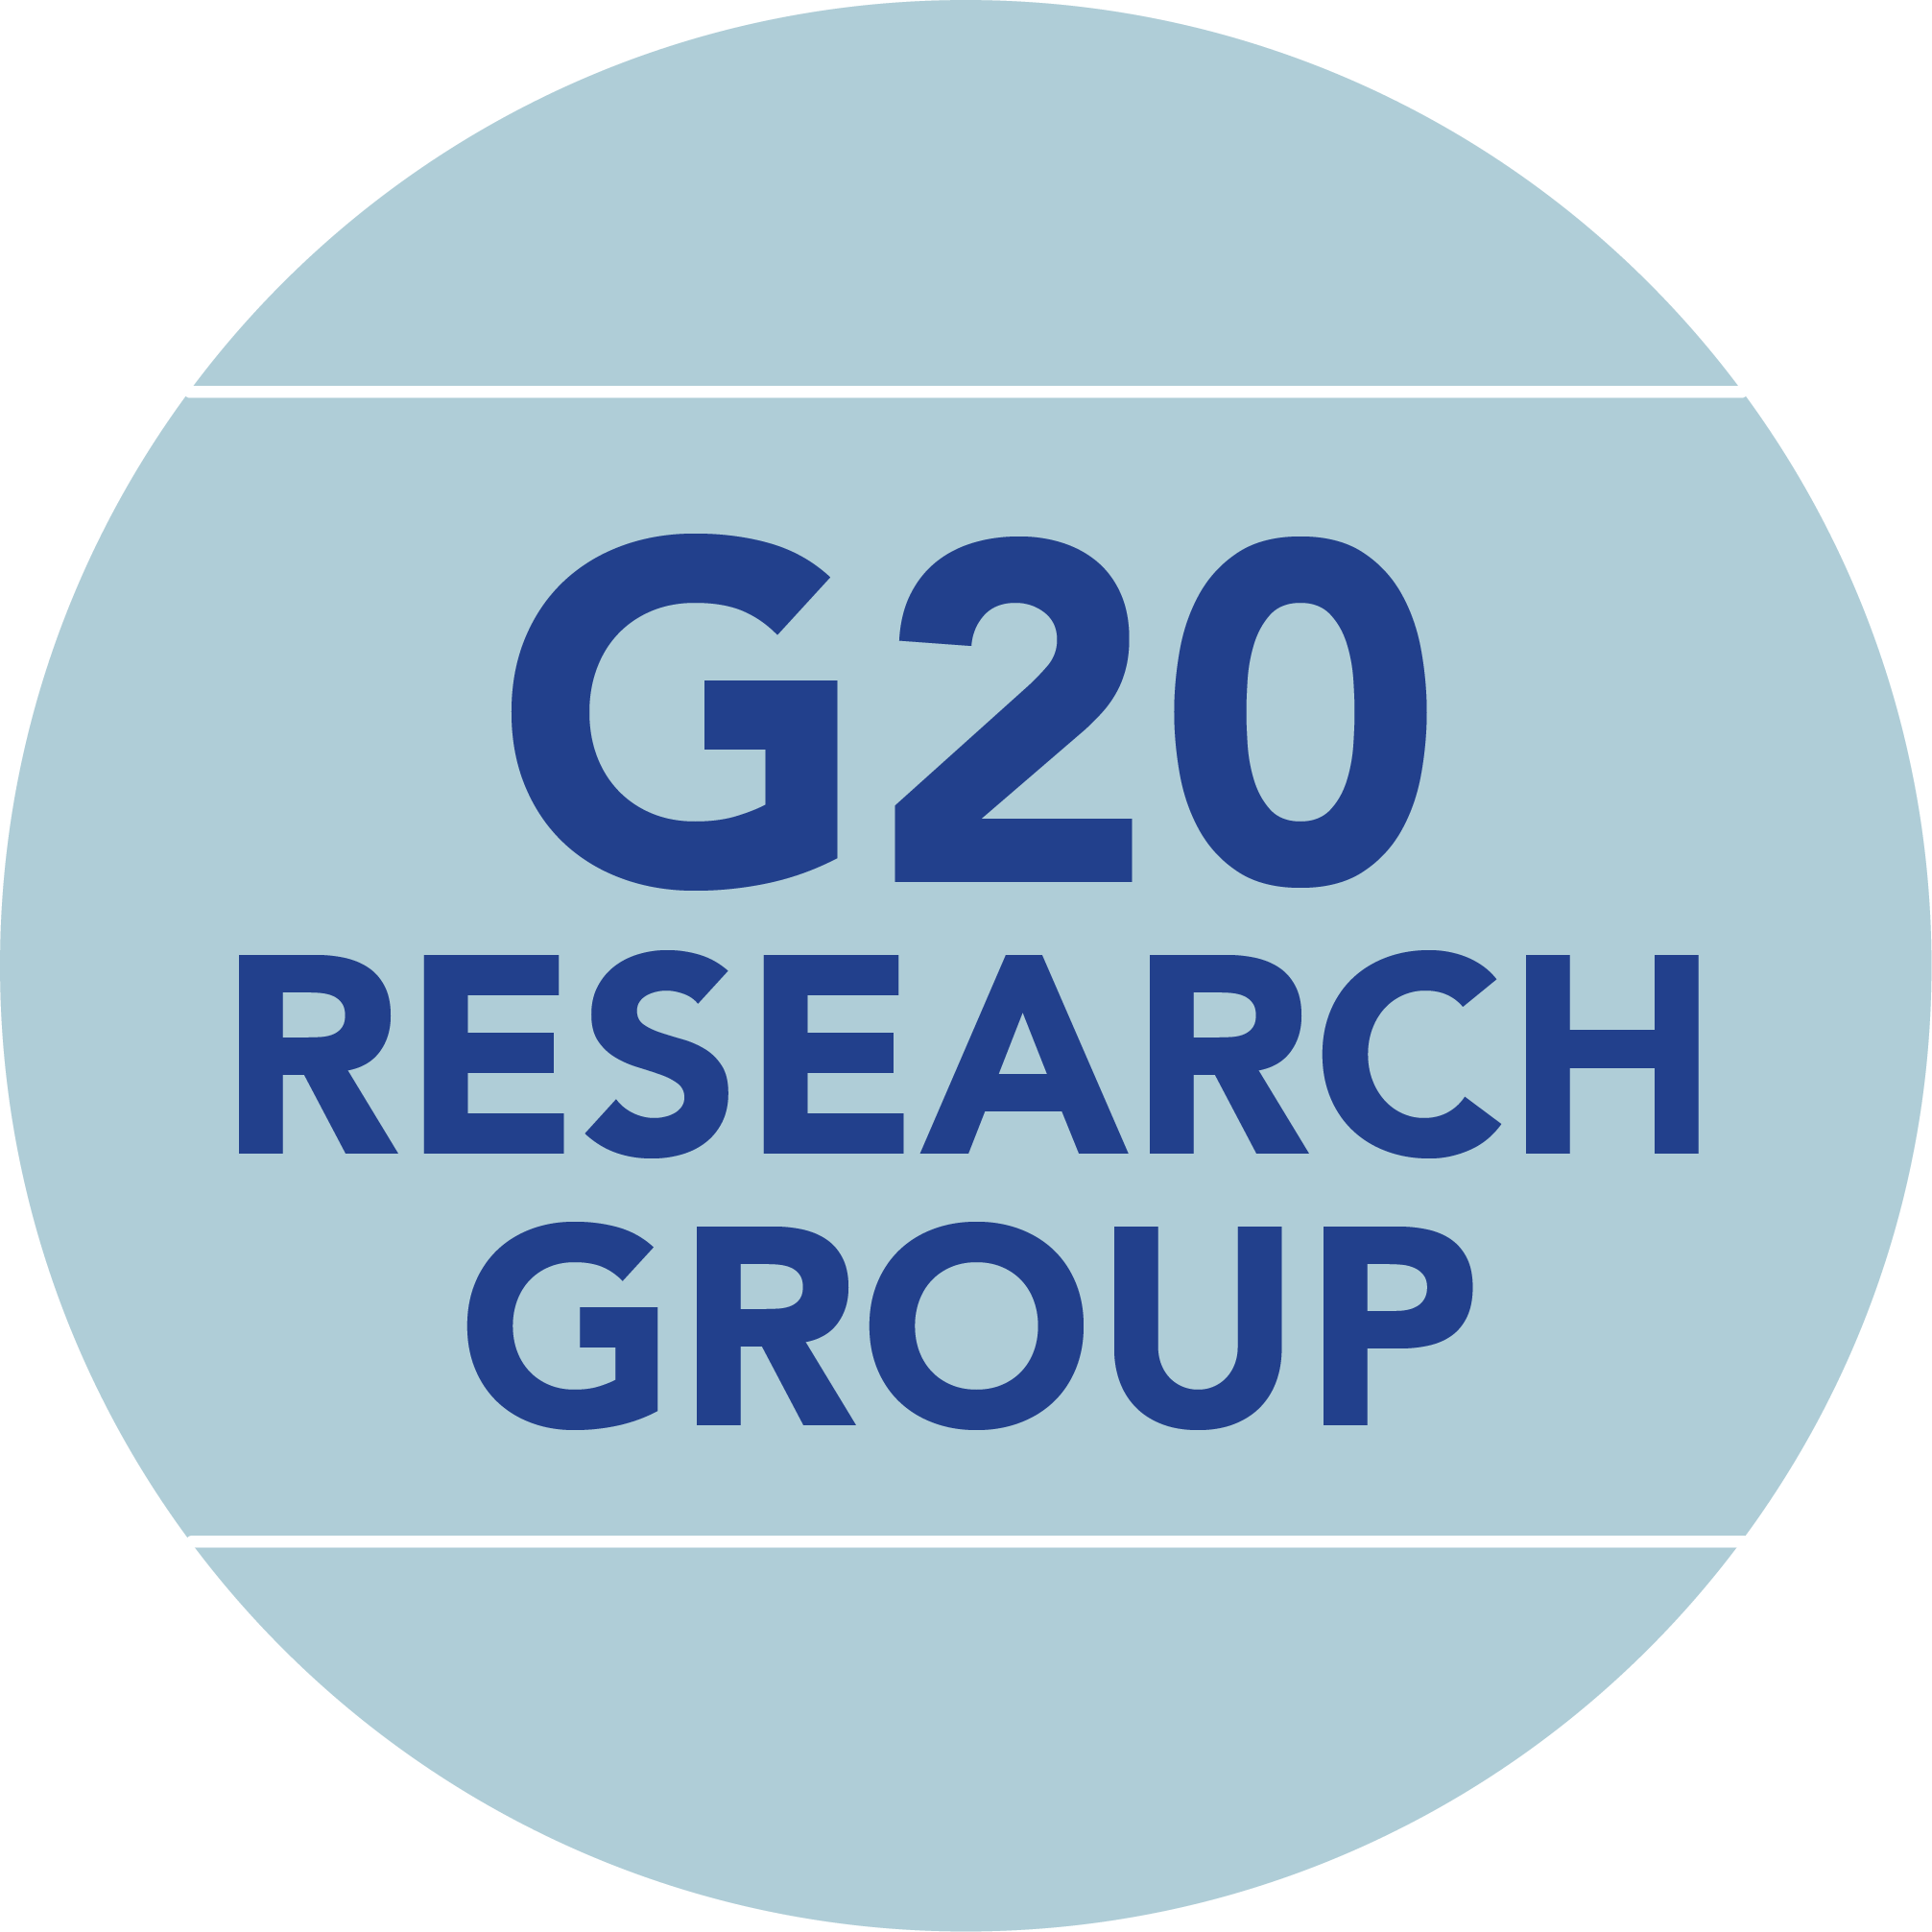 G20 Research Group